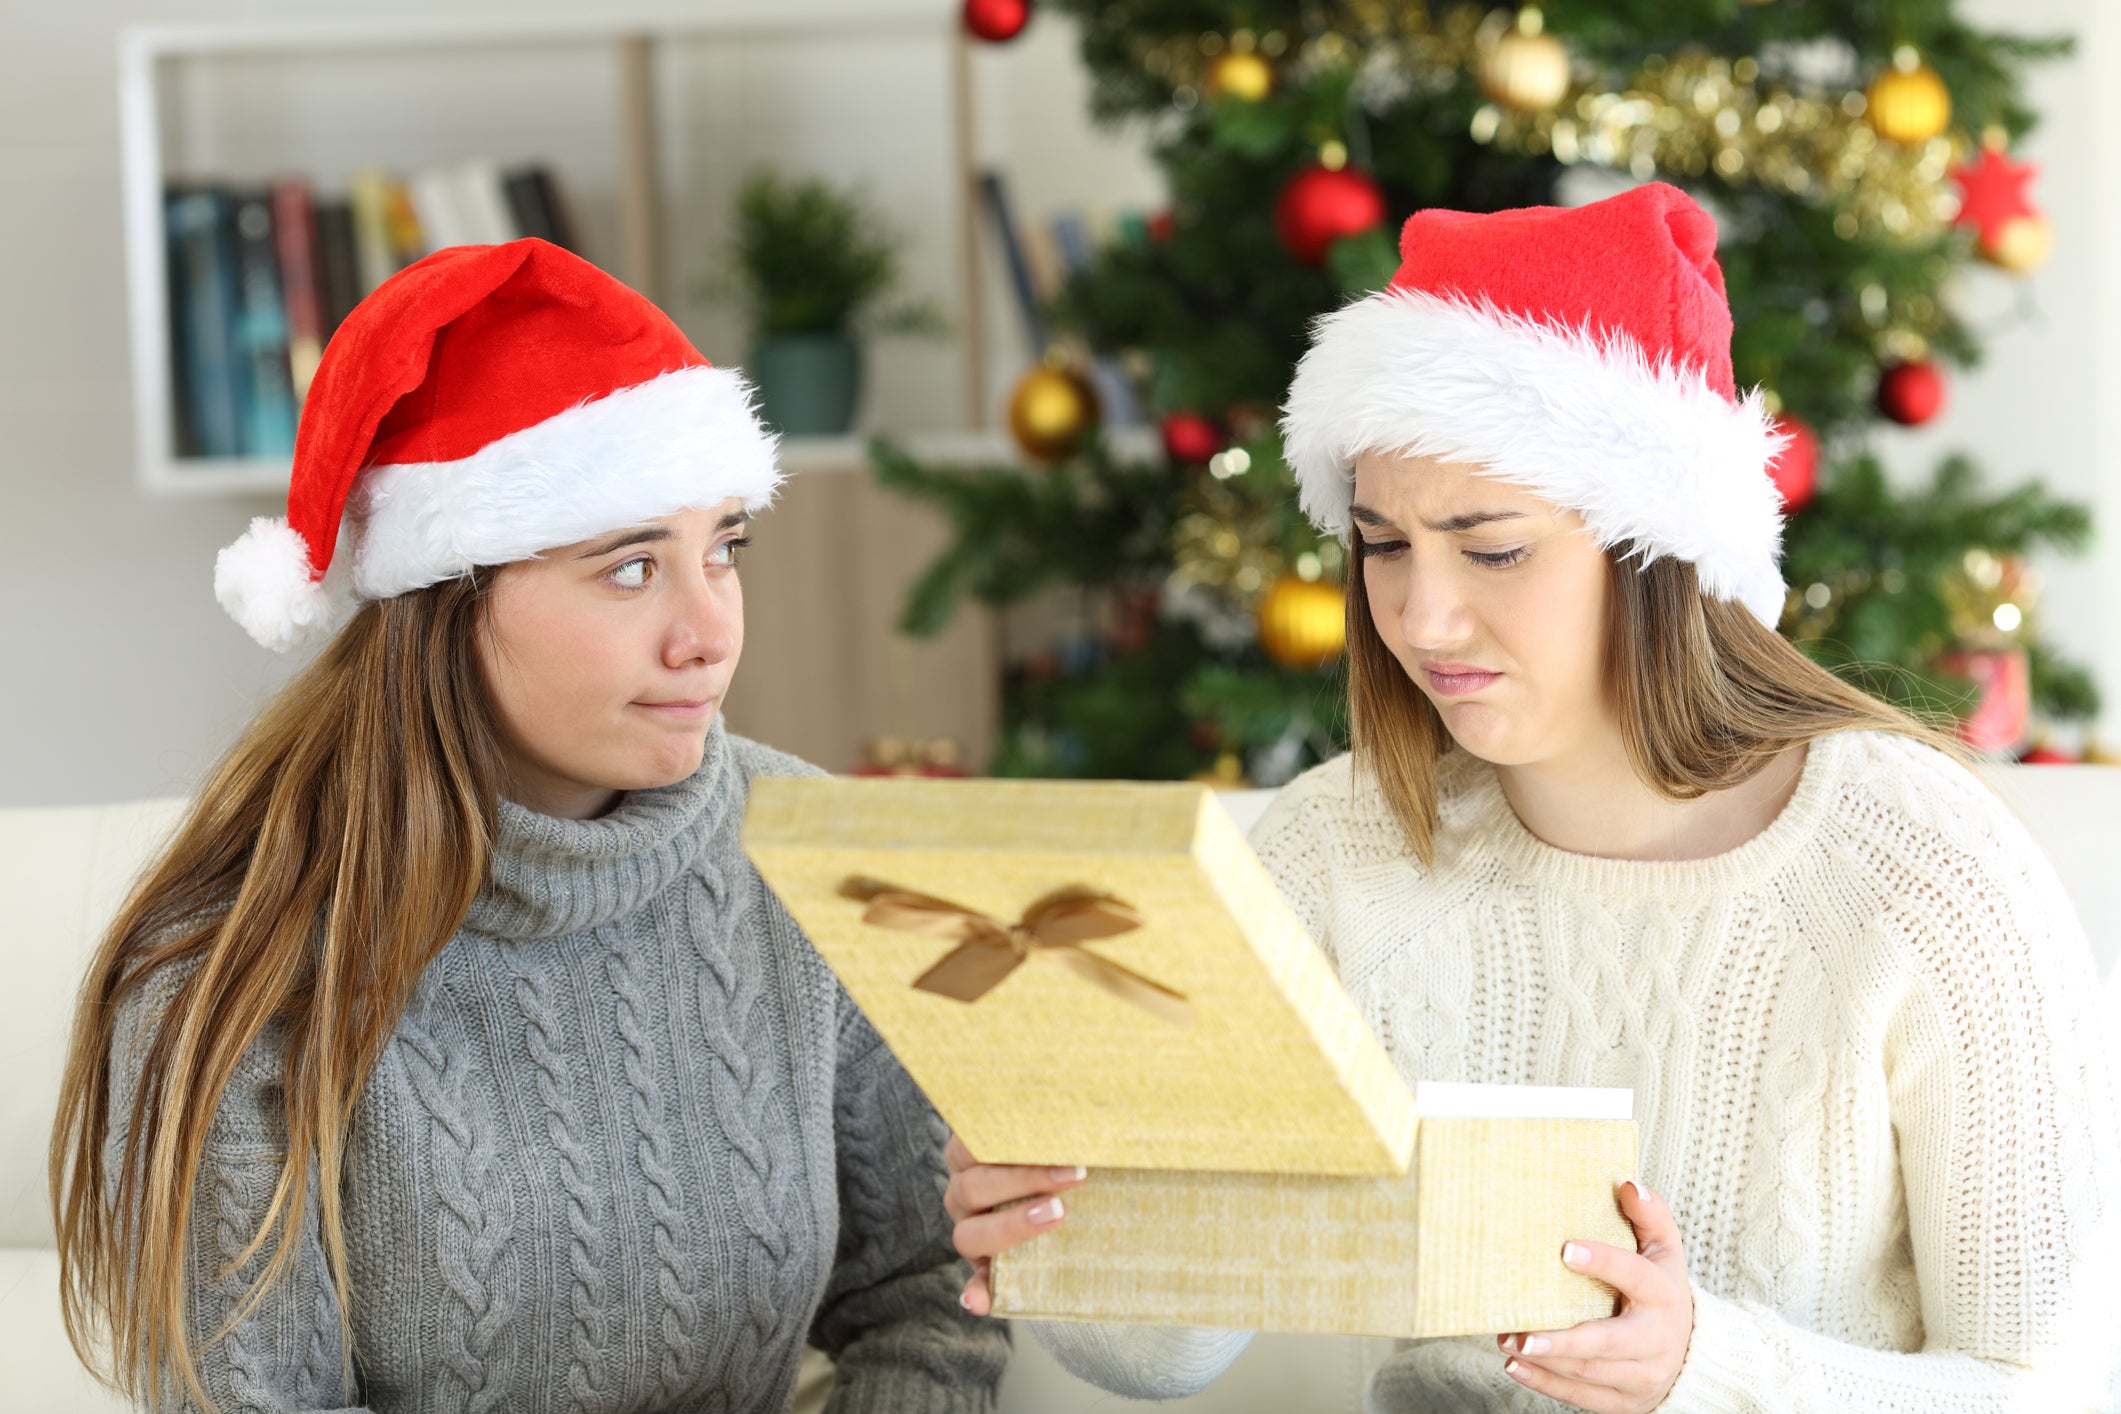 How to exchange your unwanted gift cards for something you actually want